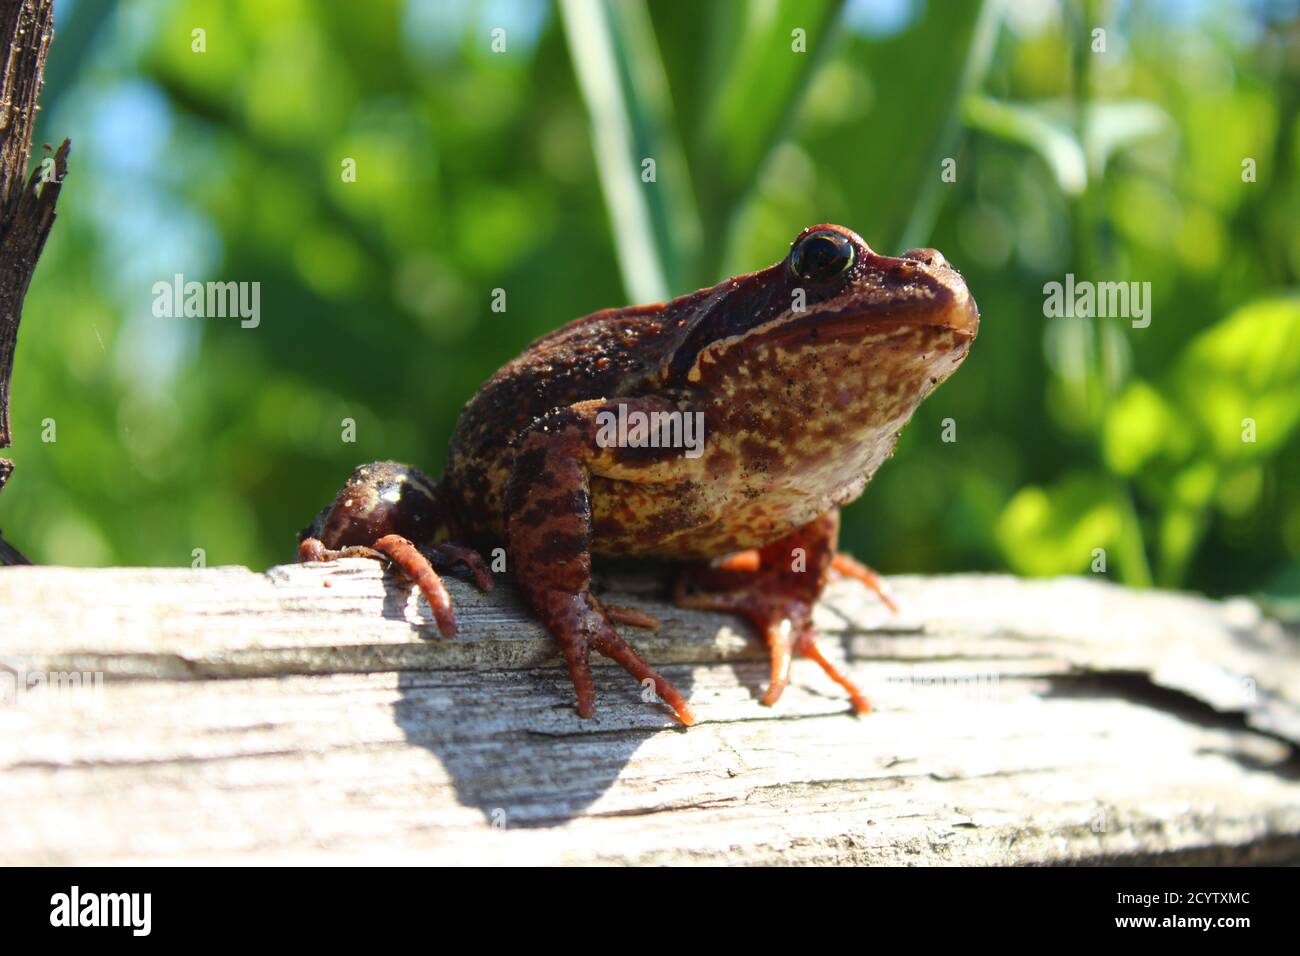 Imposing frog sitting on a piece of wood Stock Photo